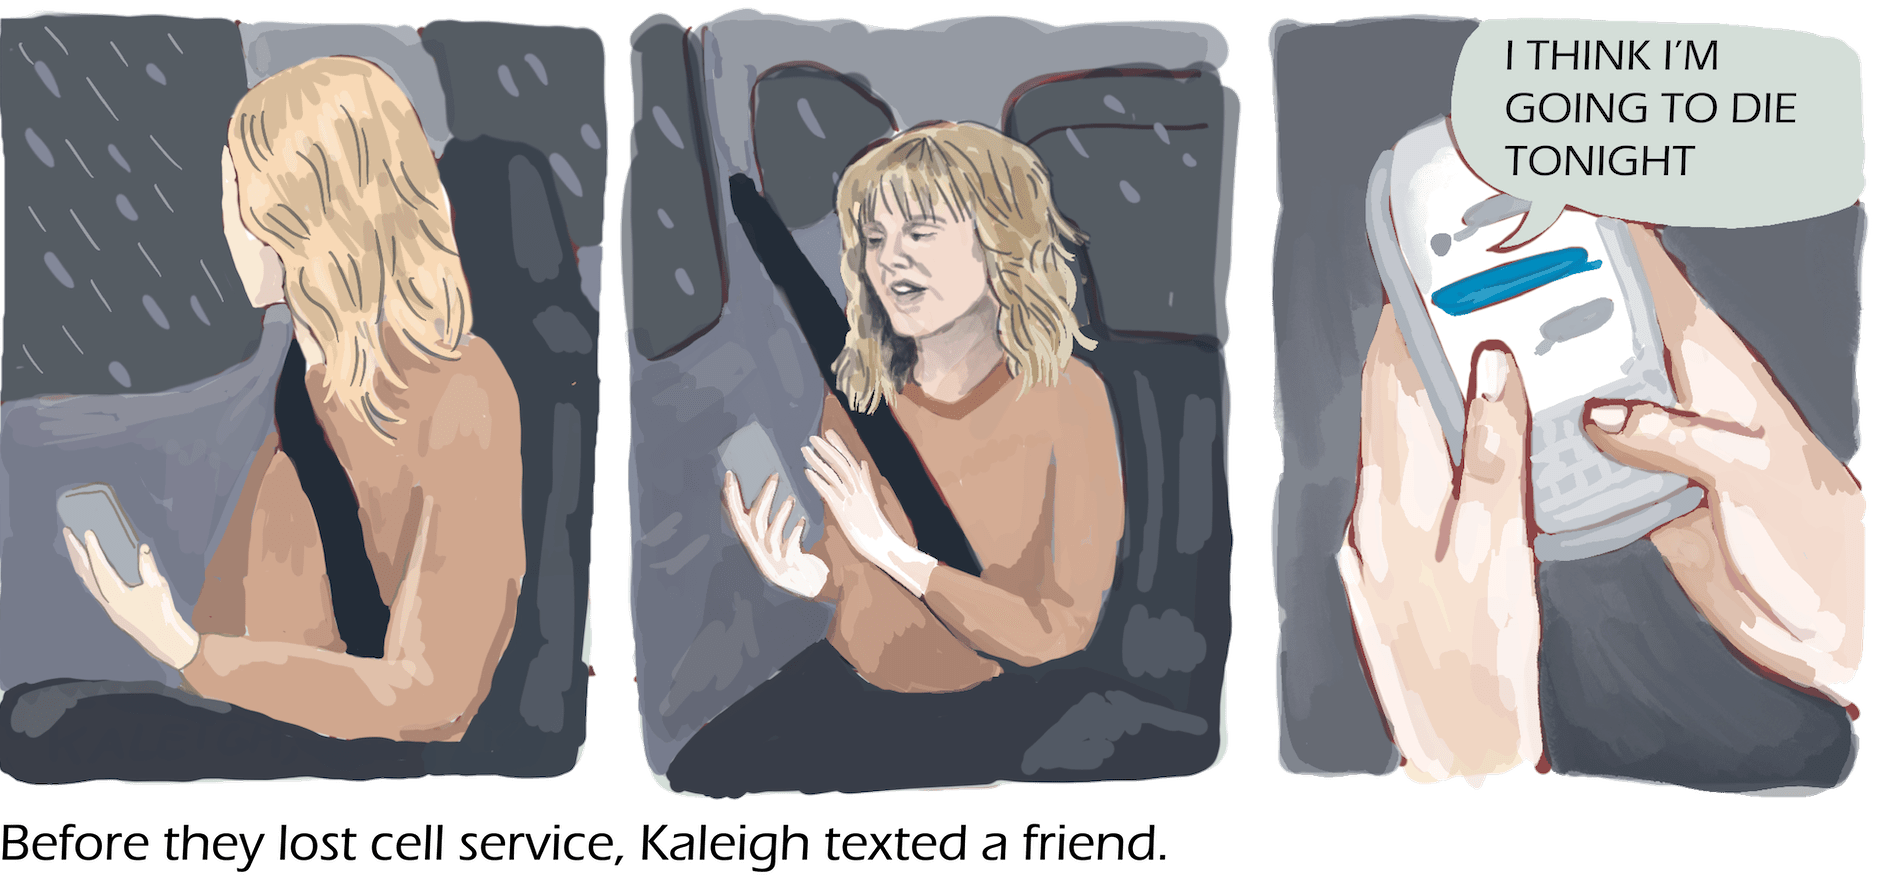 Three panel drwaing showing a girl in the back seat of a car. She takes her phone and texts a friend. Text: Before they lost cell service, Kaleigh texted a friend, “I think I’m going to die tonight.”